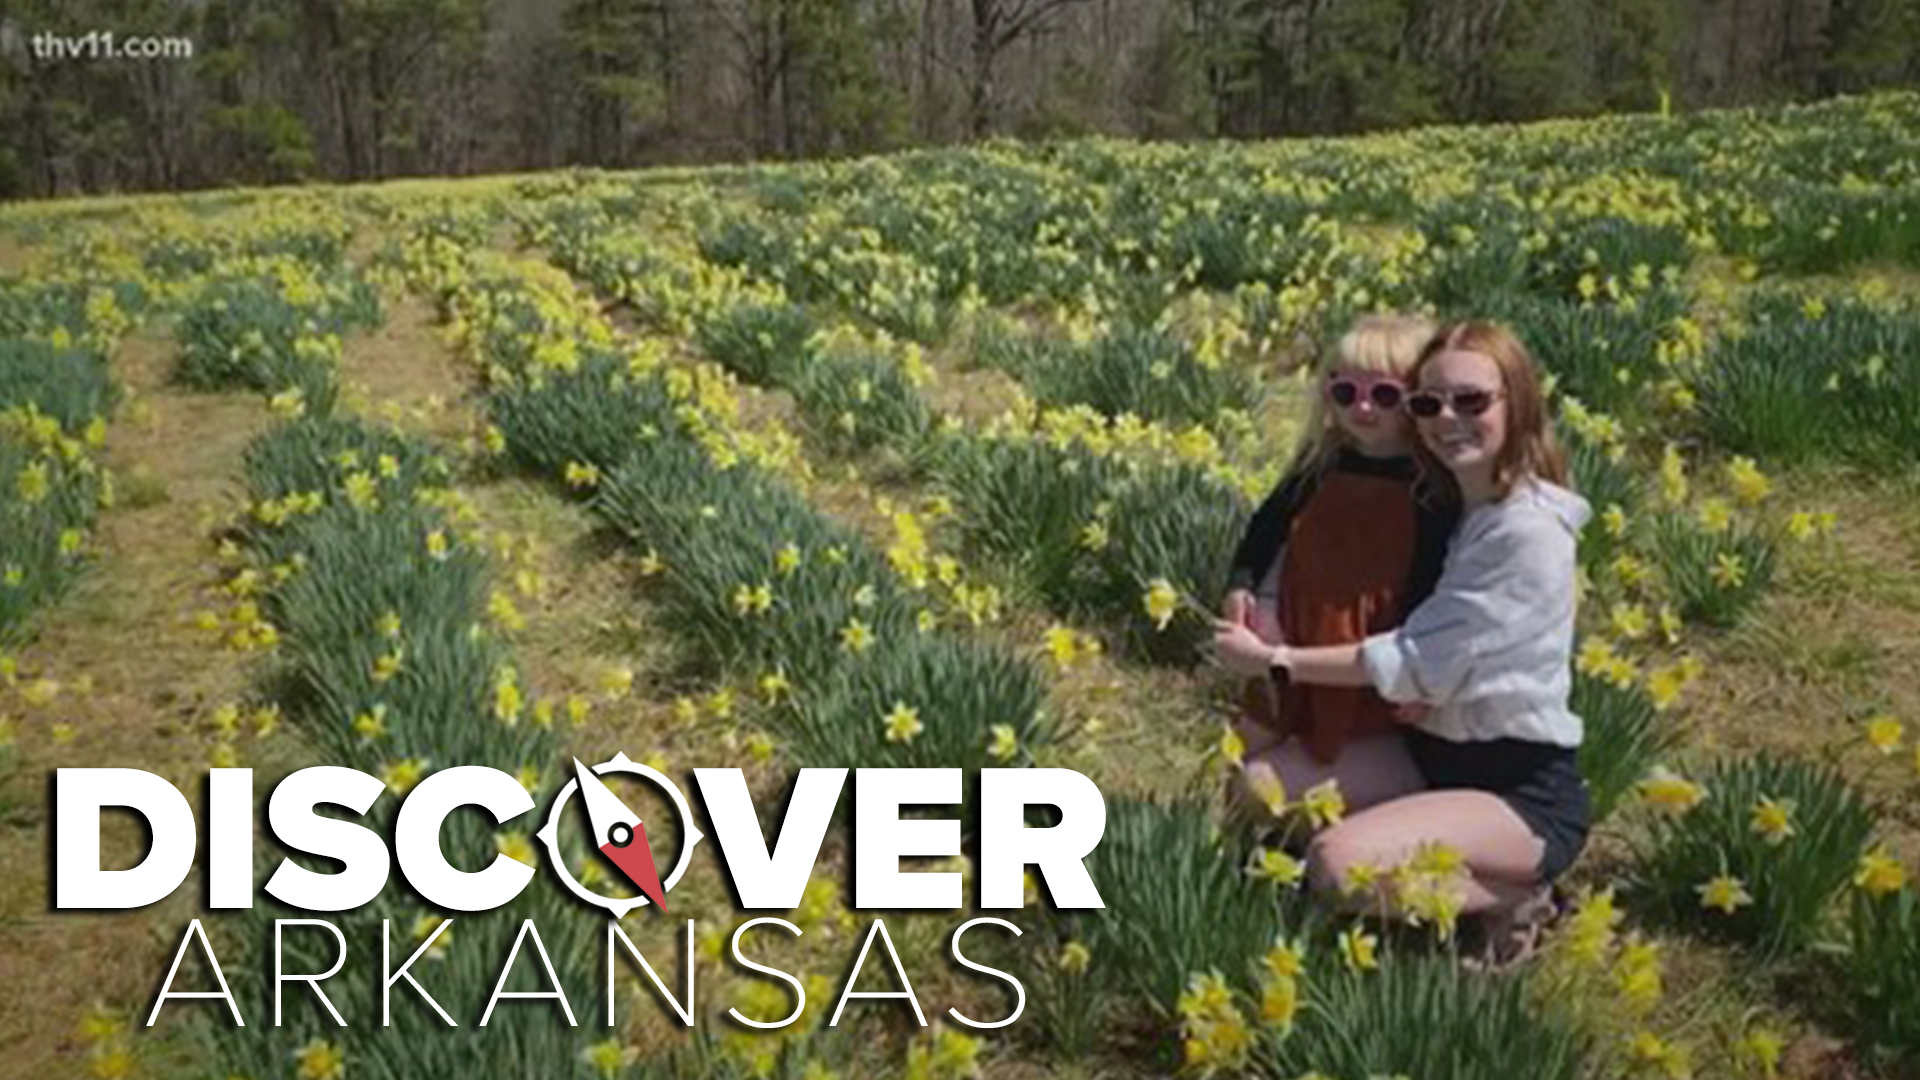 Ashley King is taking us to Wye Mountain, that has breathtaking and picture-worthy views, in this week's discover Arkansas.